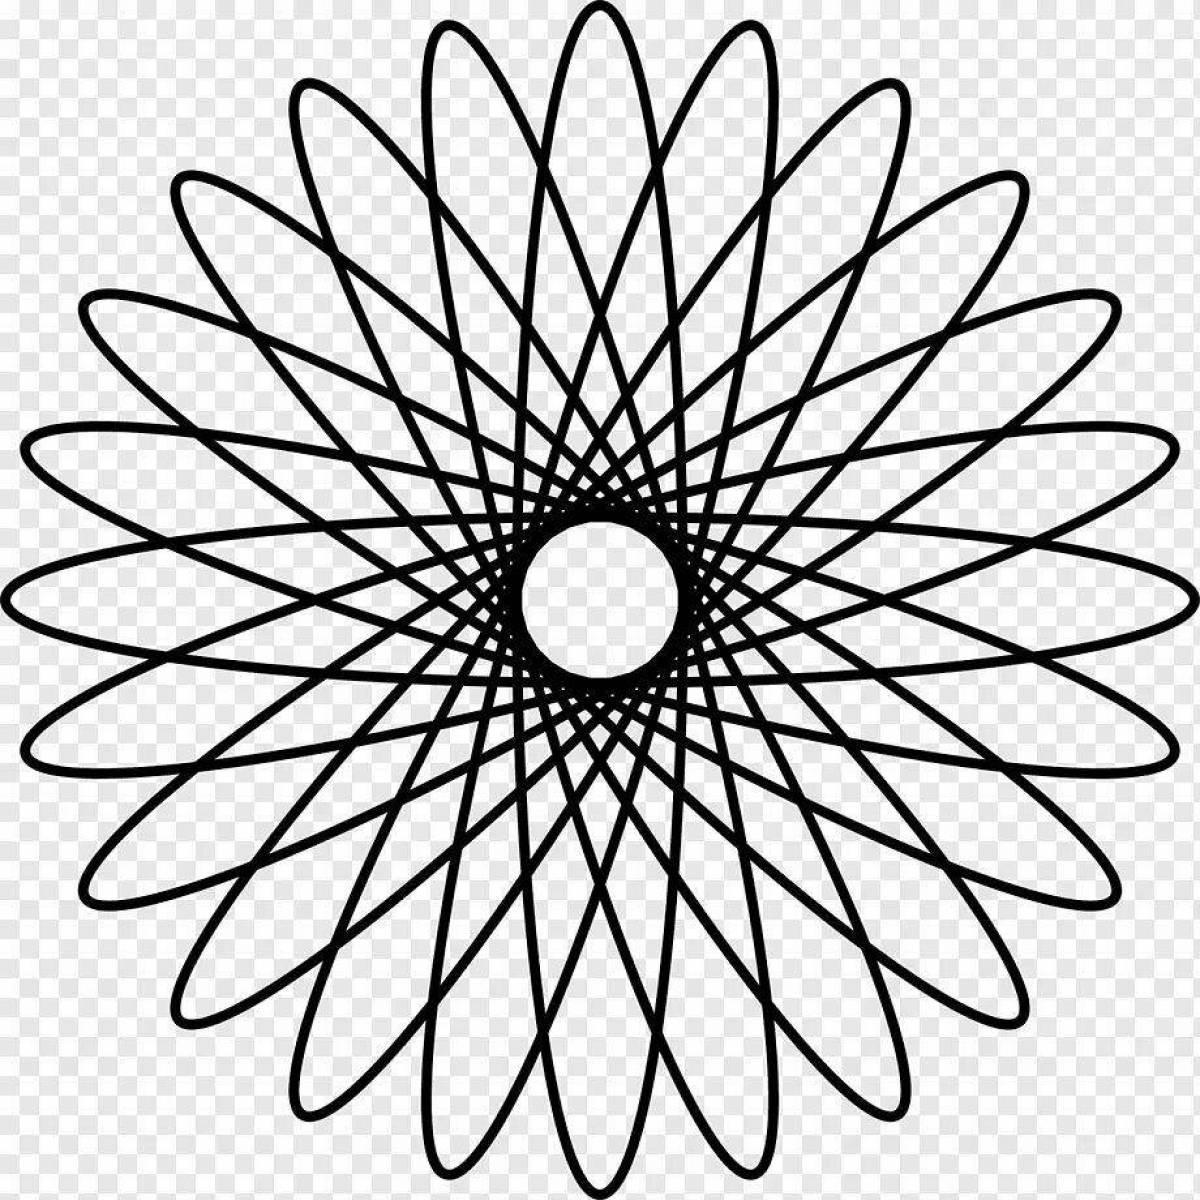 Coloring page gorgeous spiral in a circle